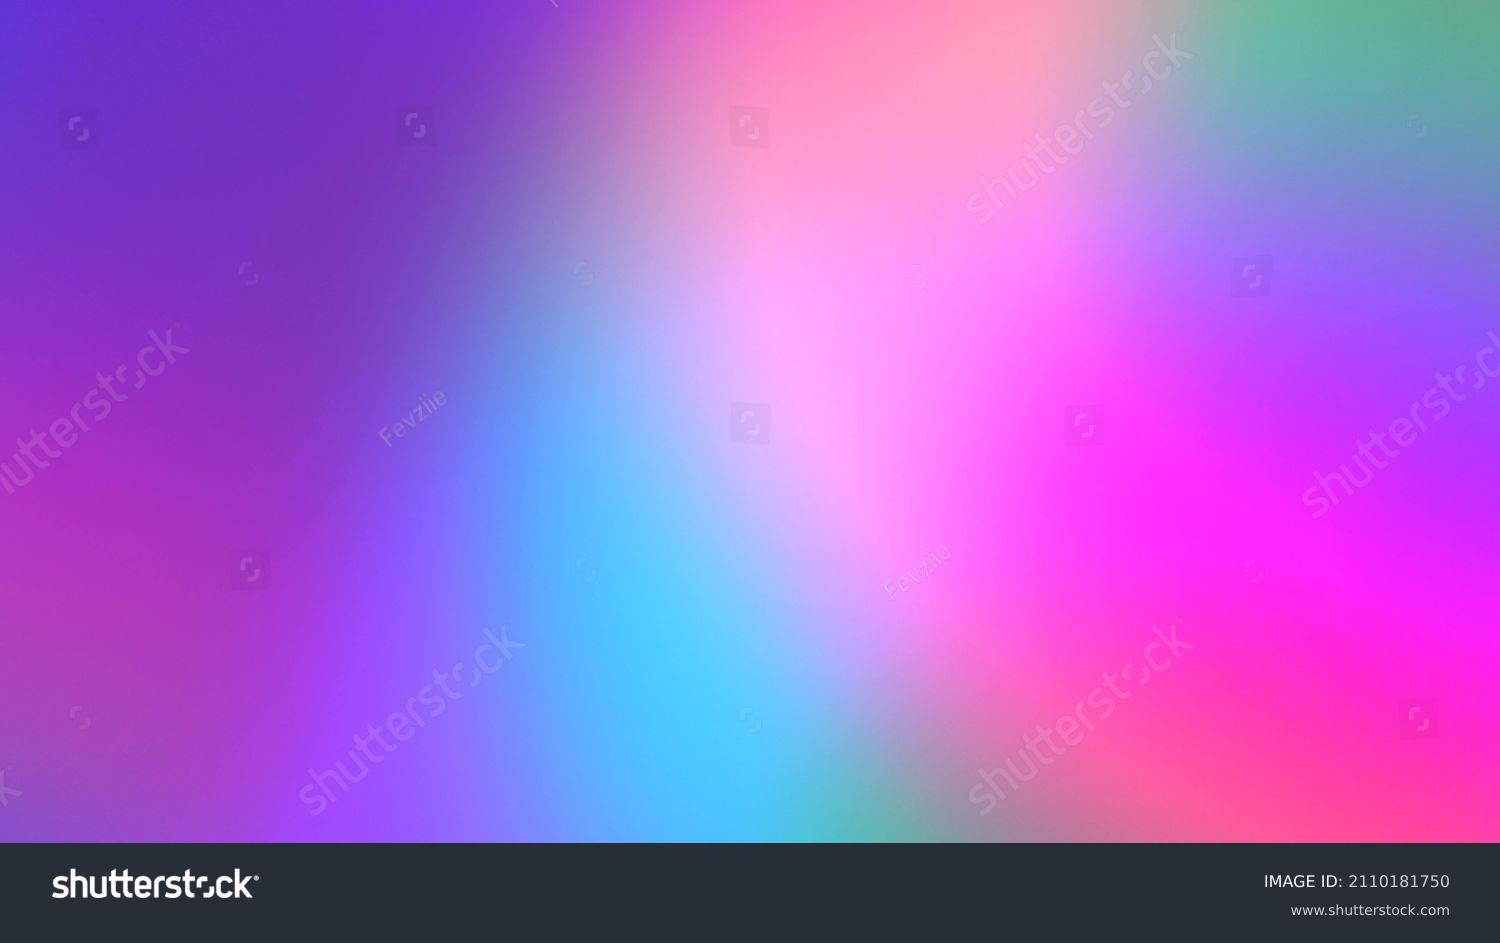 Holographic Unicorn Gradient. Trendy neon pink purple very peri blue teal colors soft blurred background #2110181750